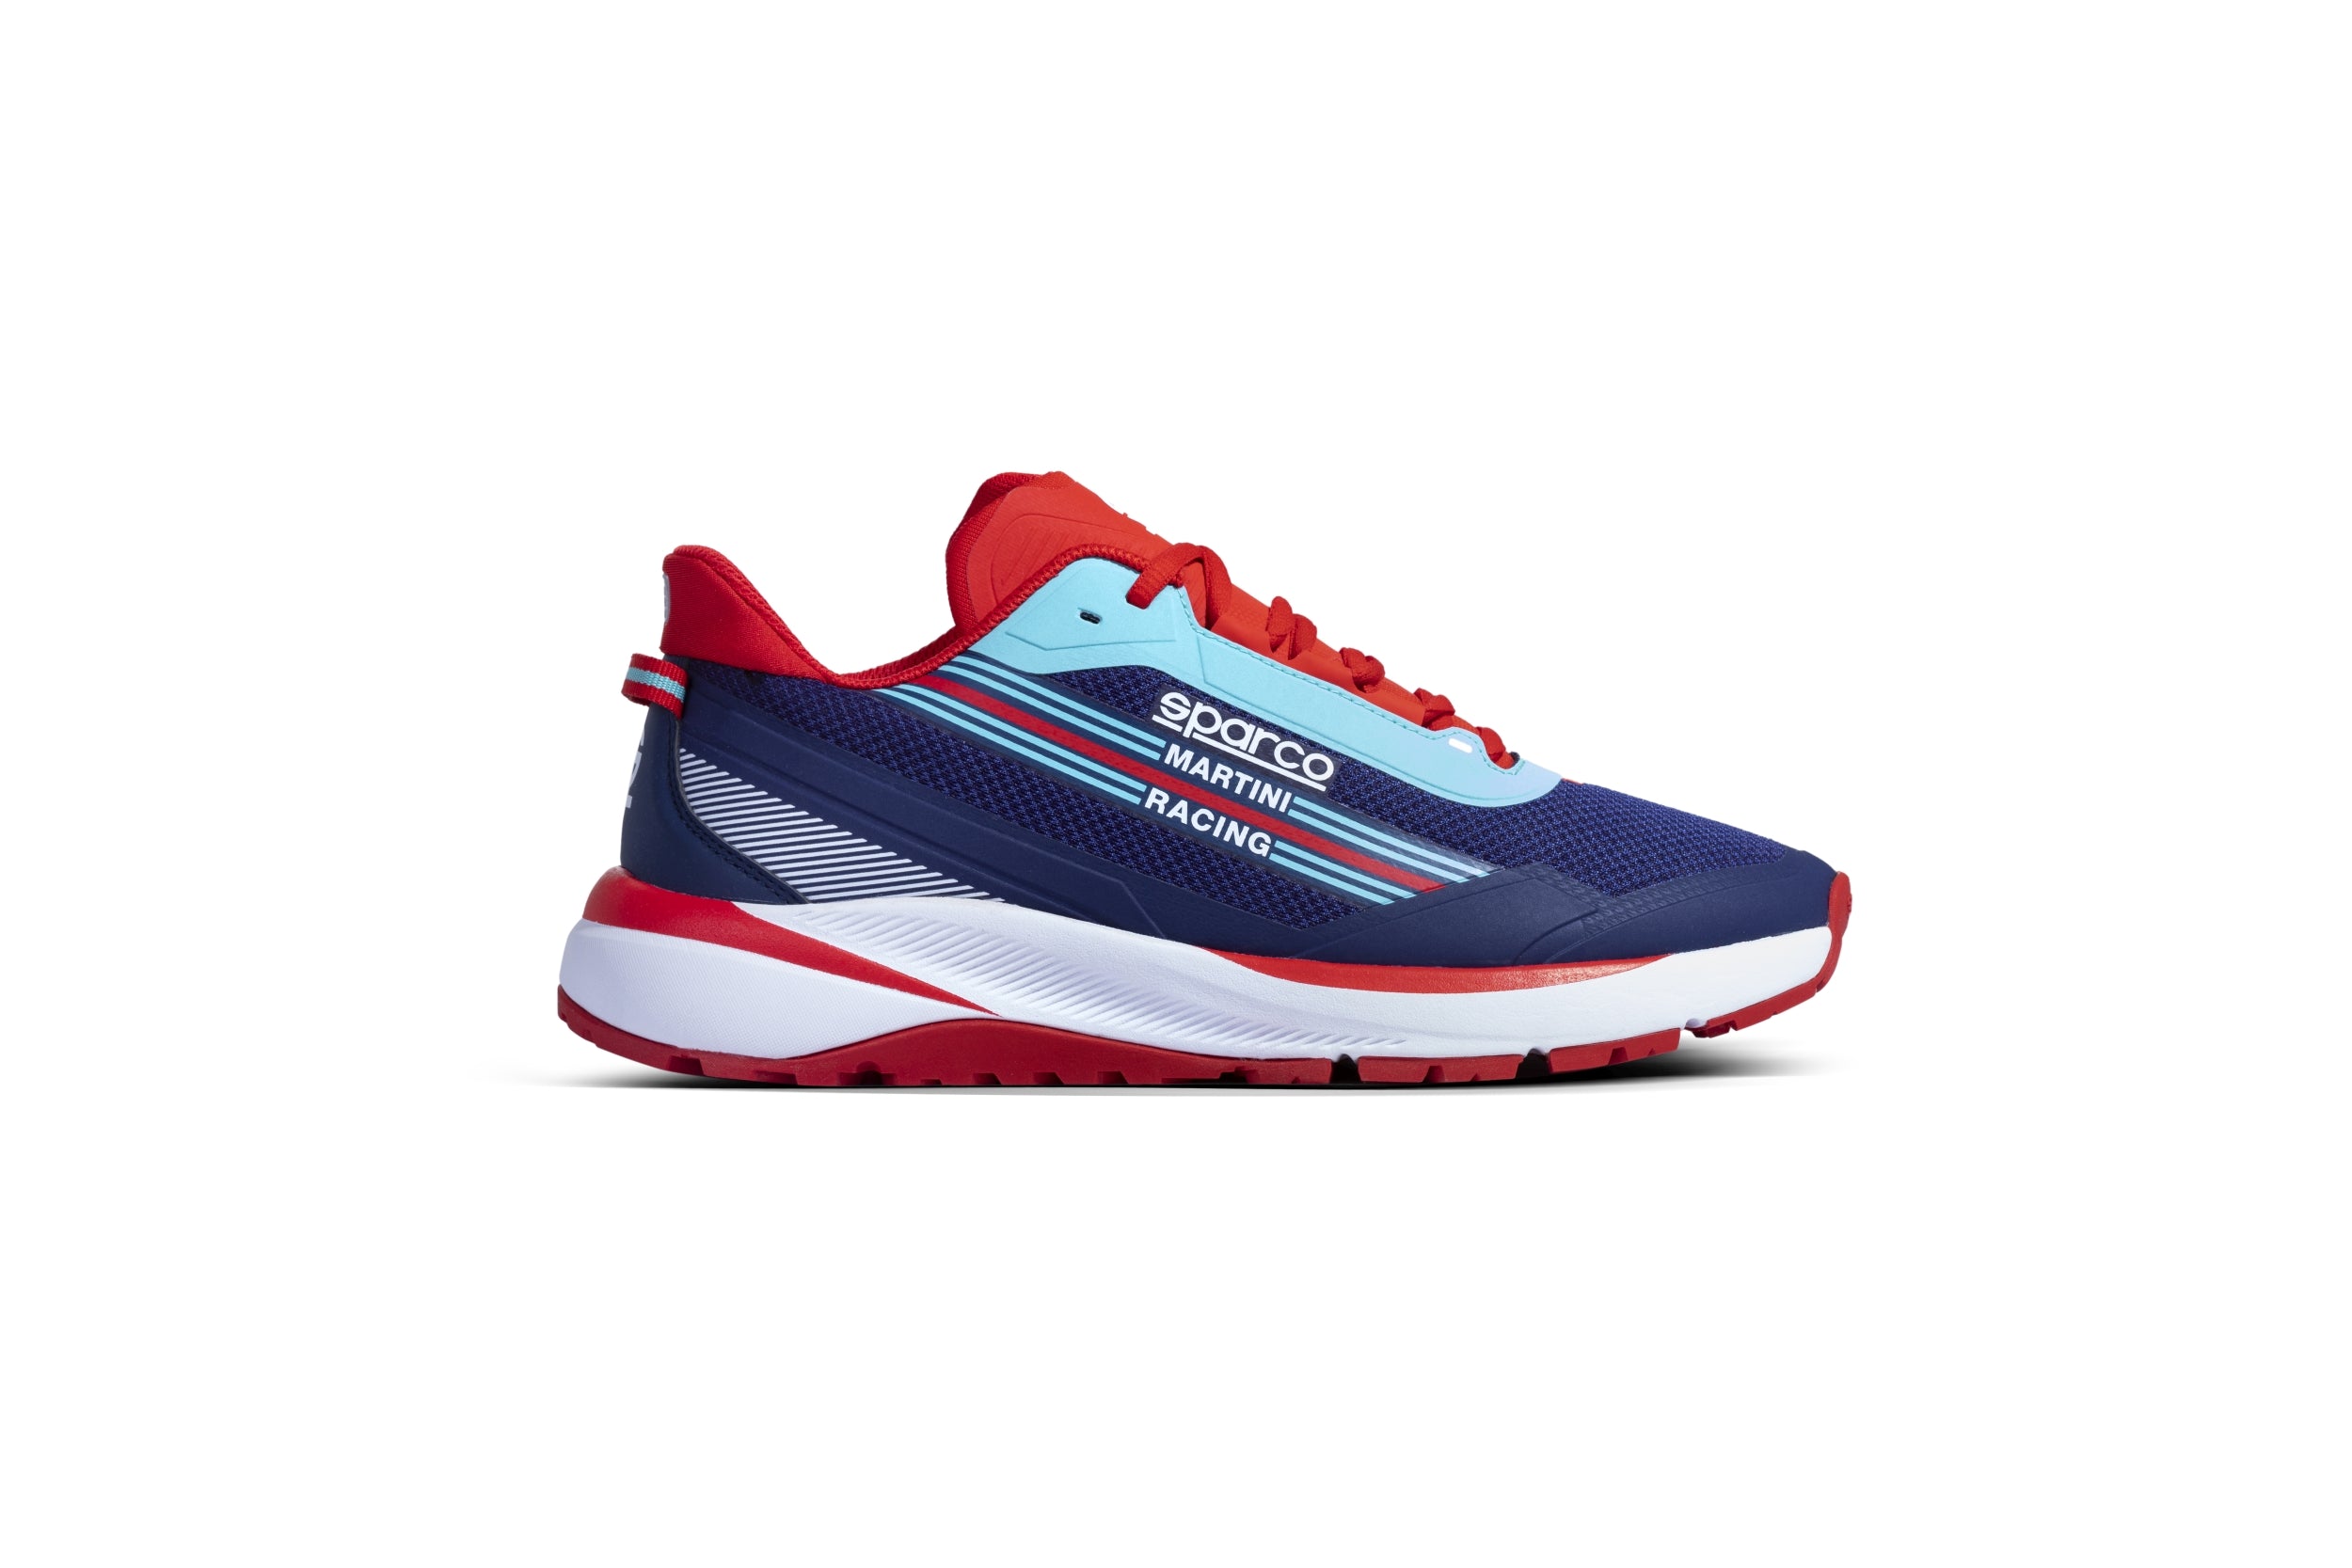 SPARCO 0012A5MR41BM S-RUN MARTINI RACING Sneakers Shoes, navy blue, size 41 Photo-2 